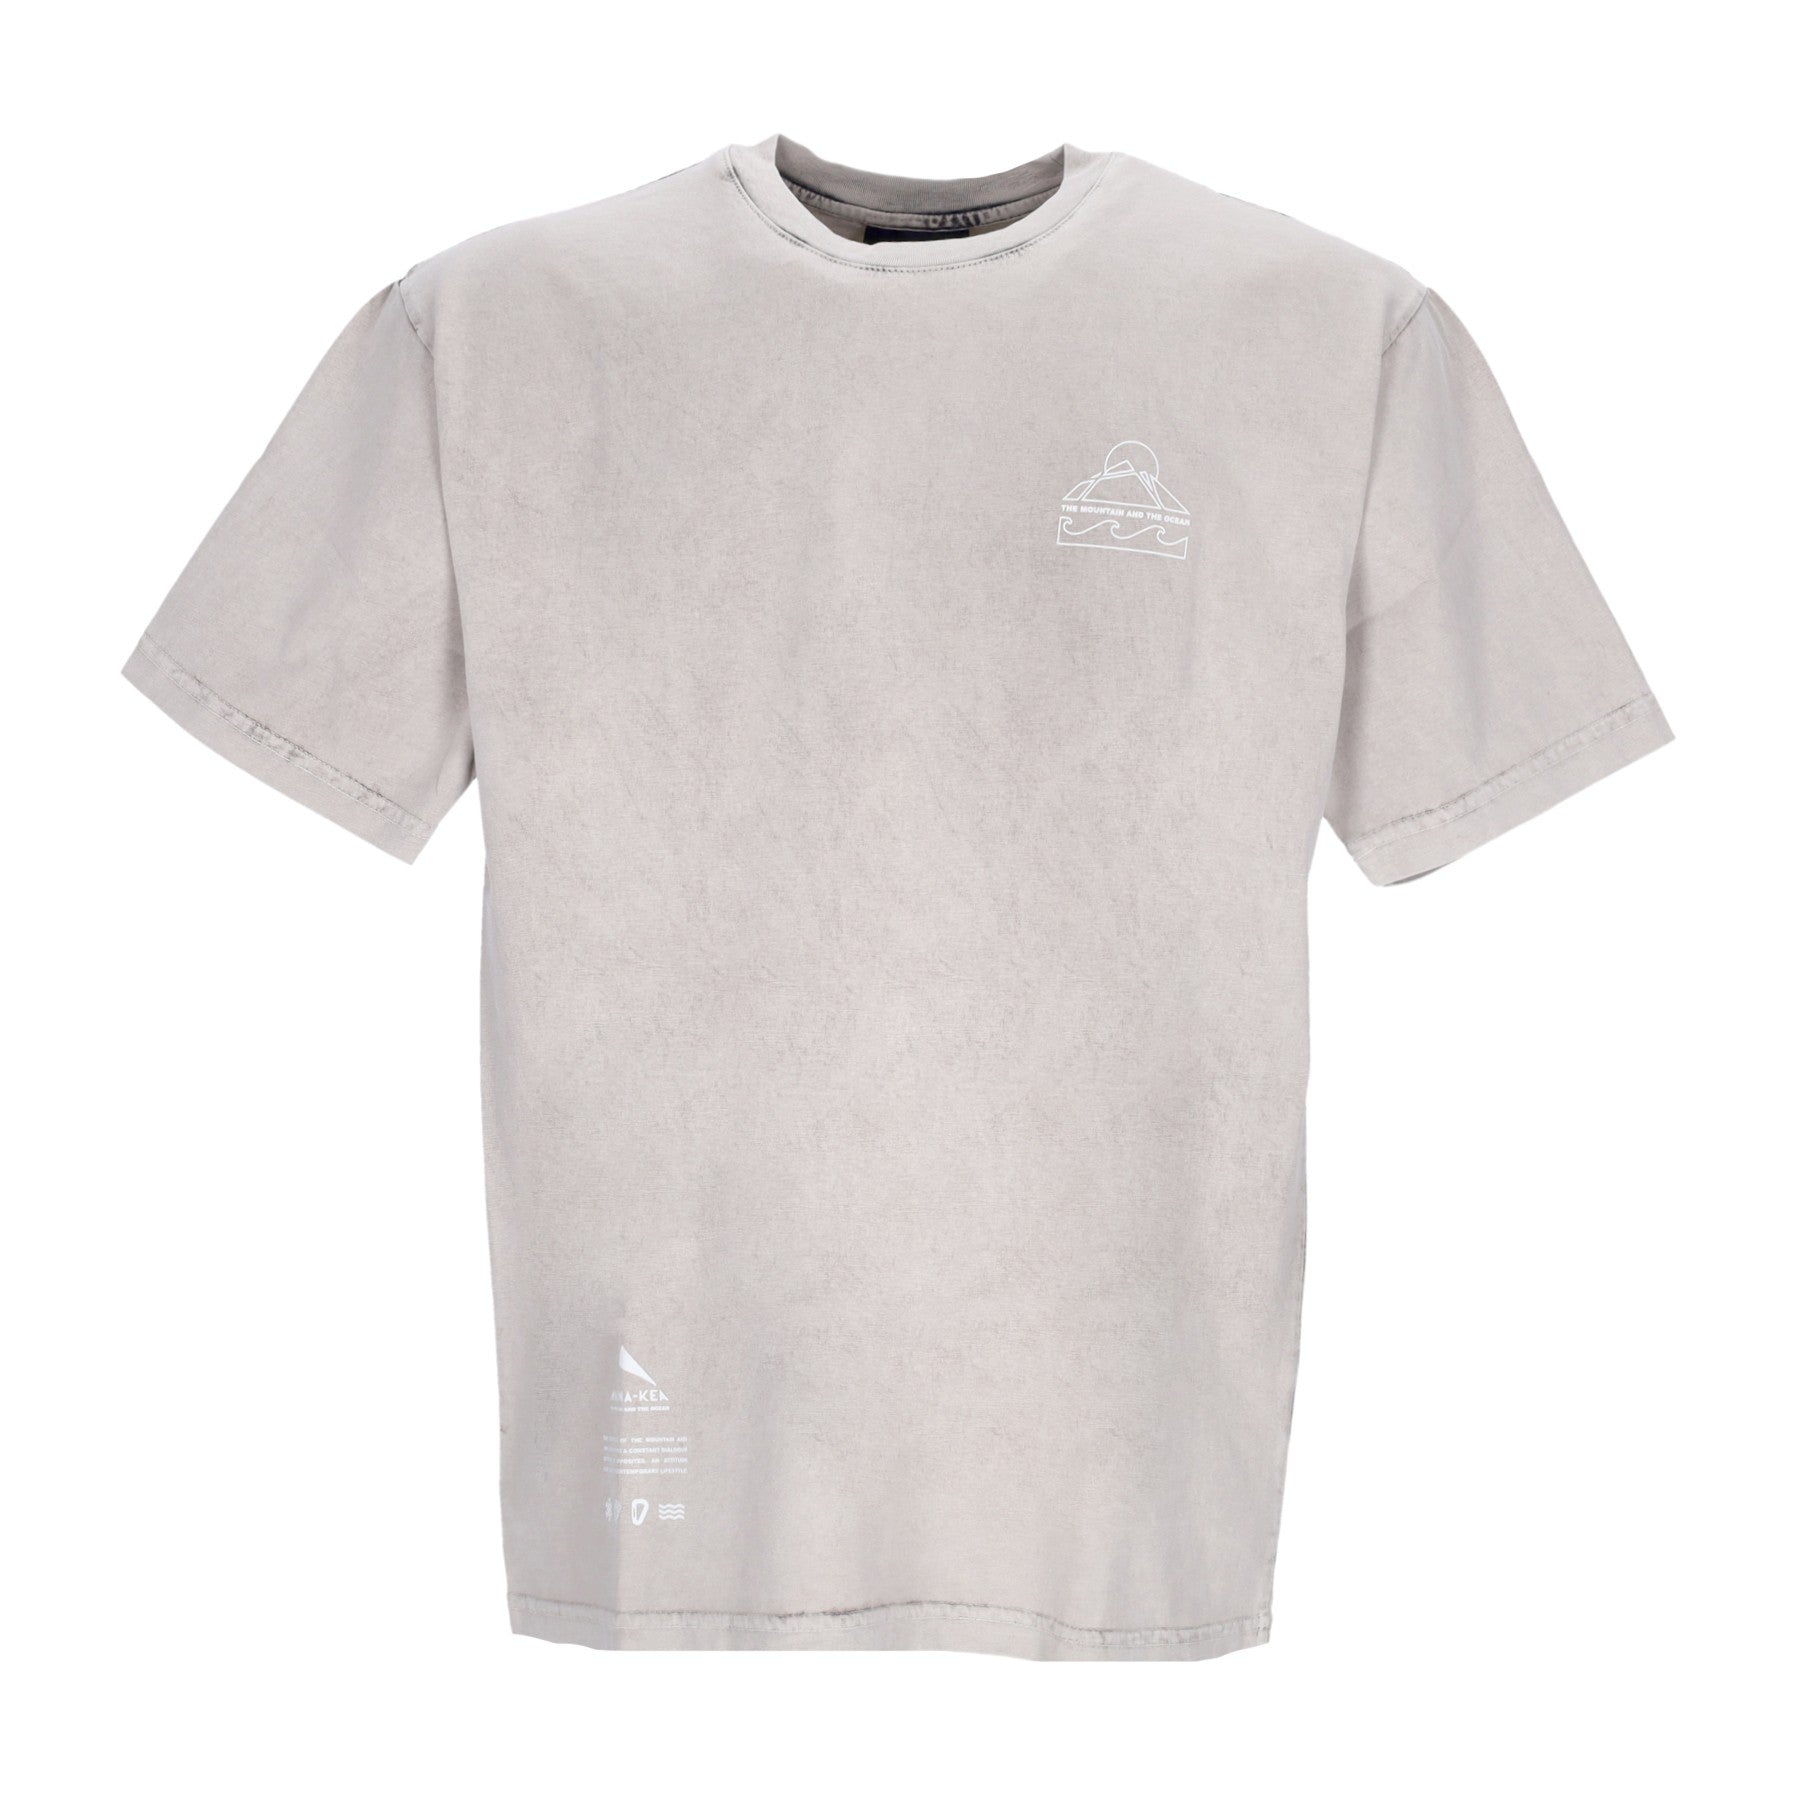 Stone Washed Tee Gray Men's T-Shirt